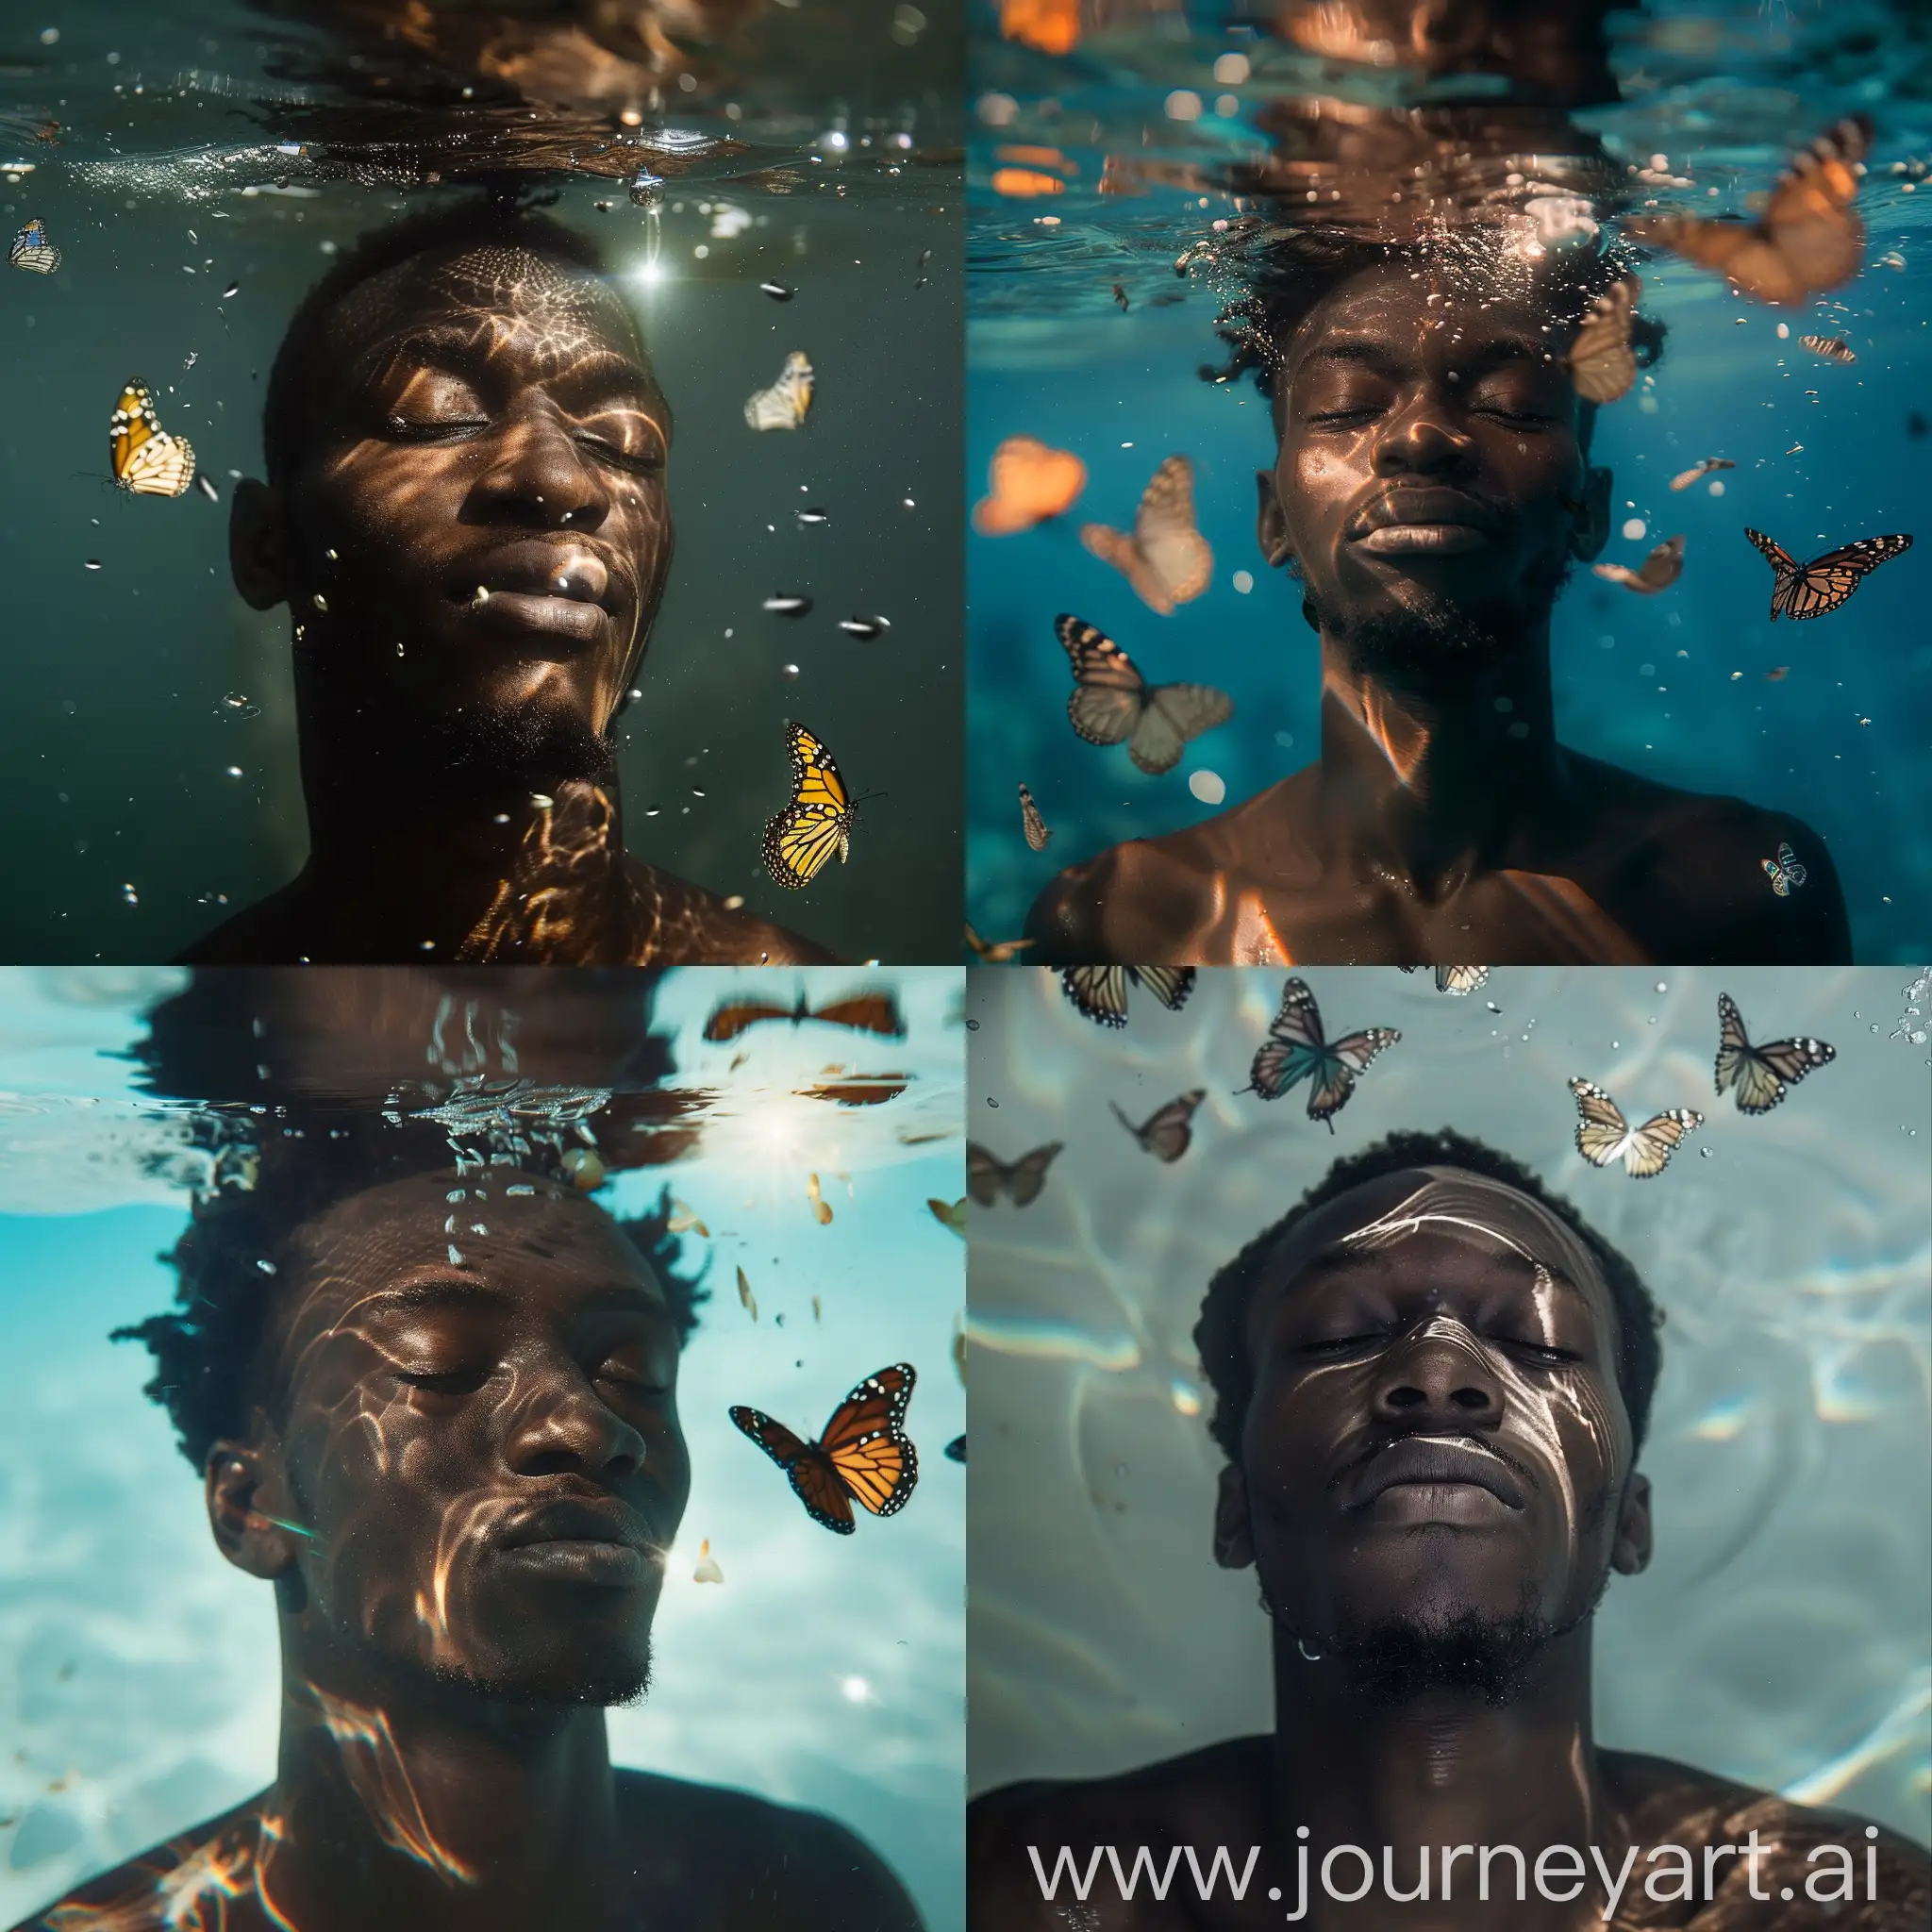 African-Man-Serenely-Submerged-Underwater-Meditation-with-Light-and-Butterflies